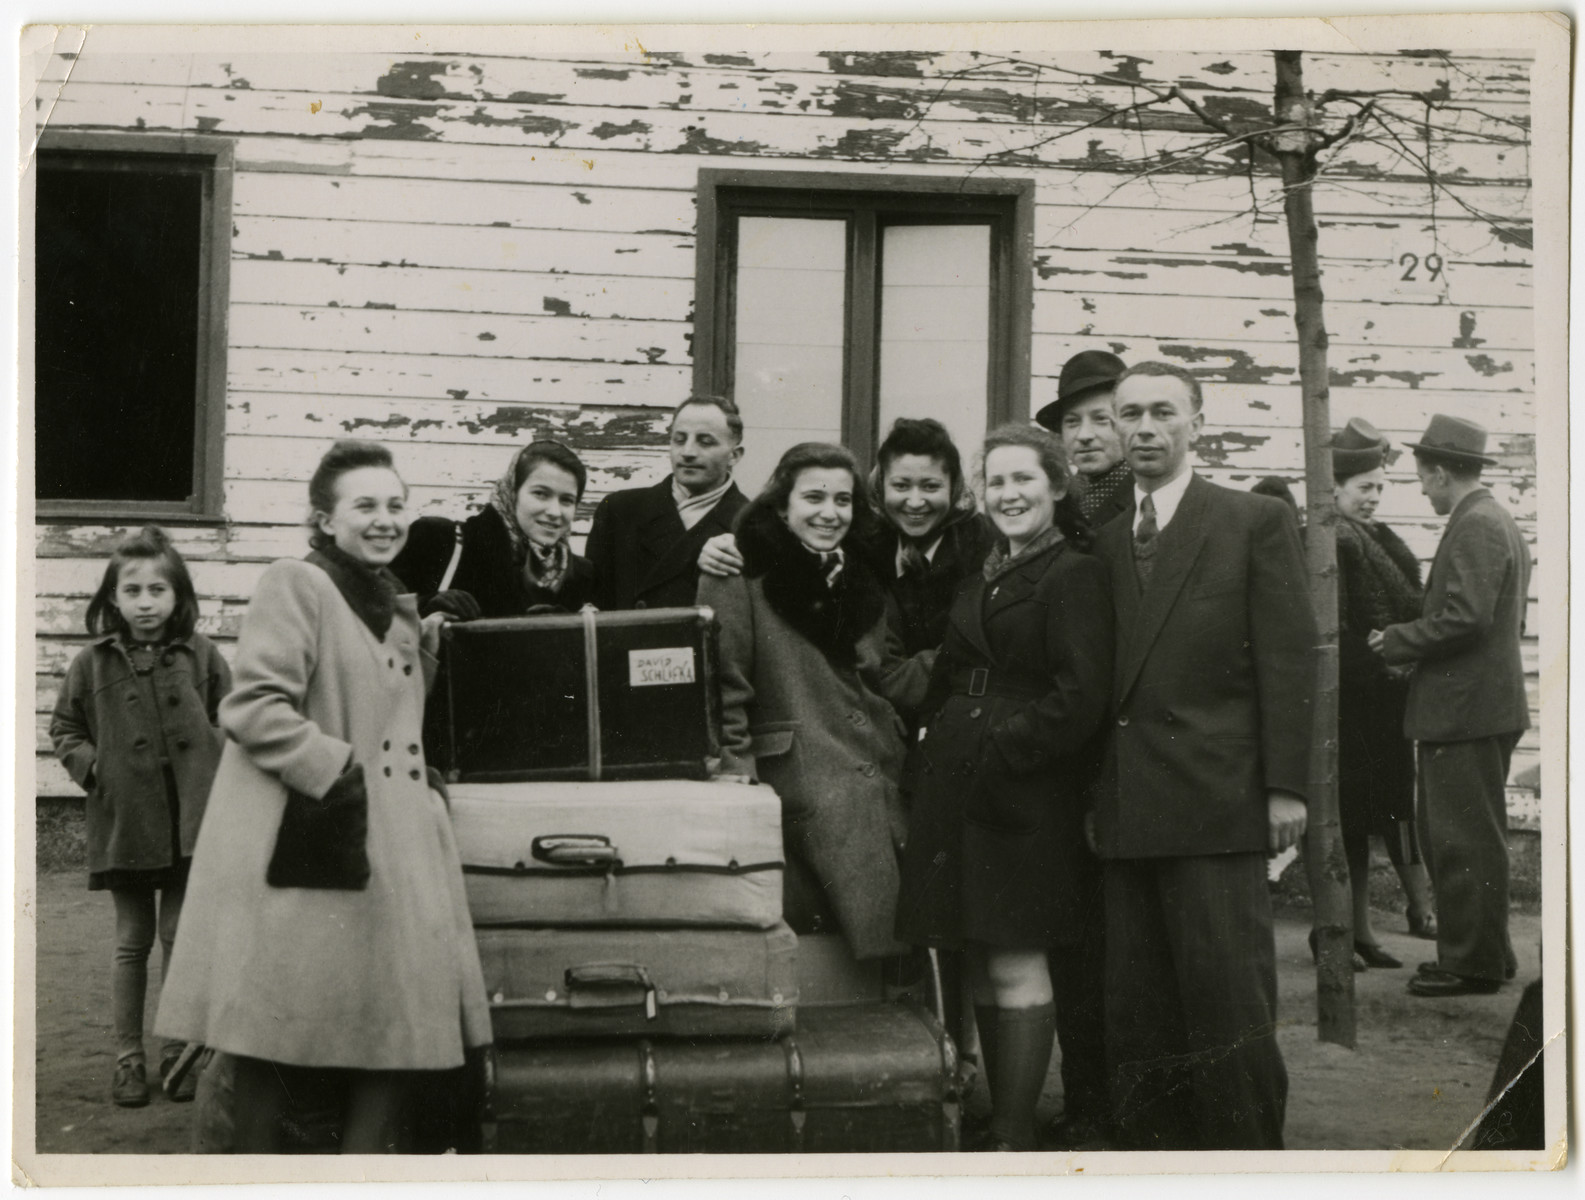 Residents of the Schlachtensee displaced persons' camp bid farewell to the Rothbaums who are leaving for America.

Pictured are Lusia, Genia and Chajka Rothbaum as well as Laura Kimmel (fourth from right) and Alfred Kimmel (second from right).